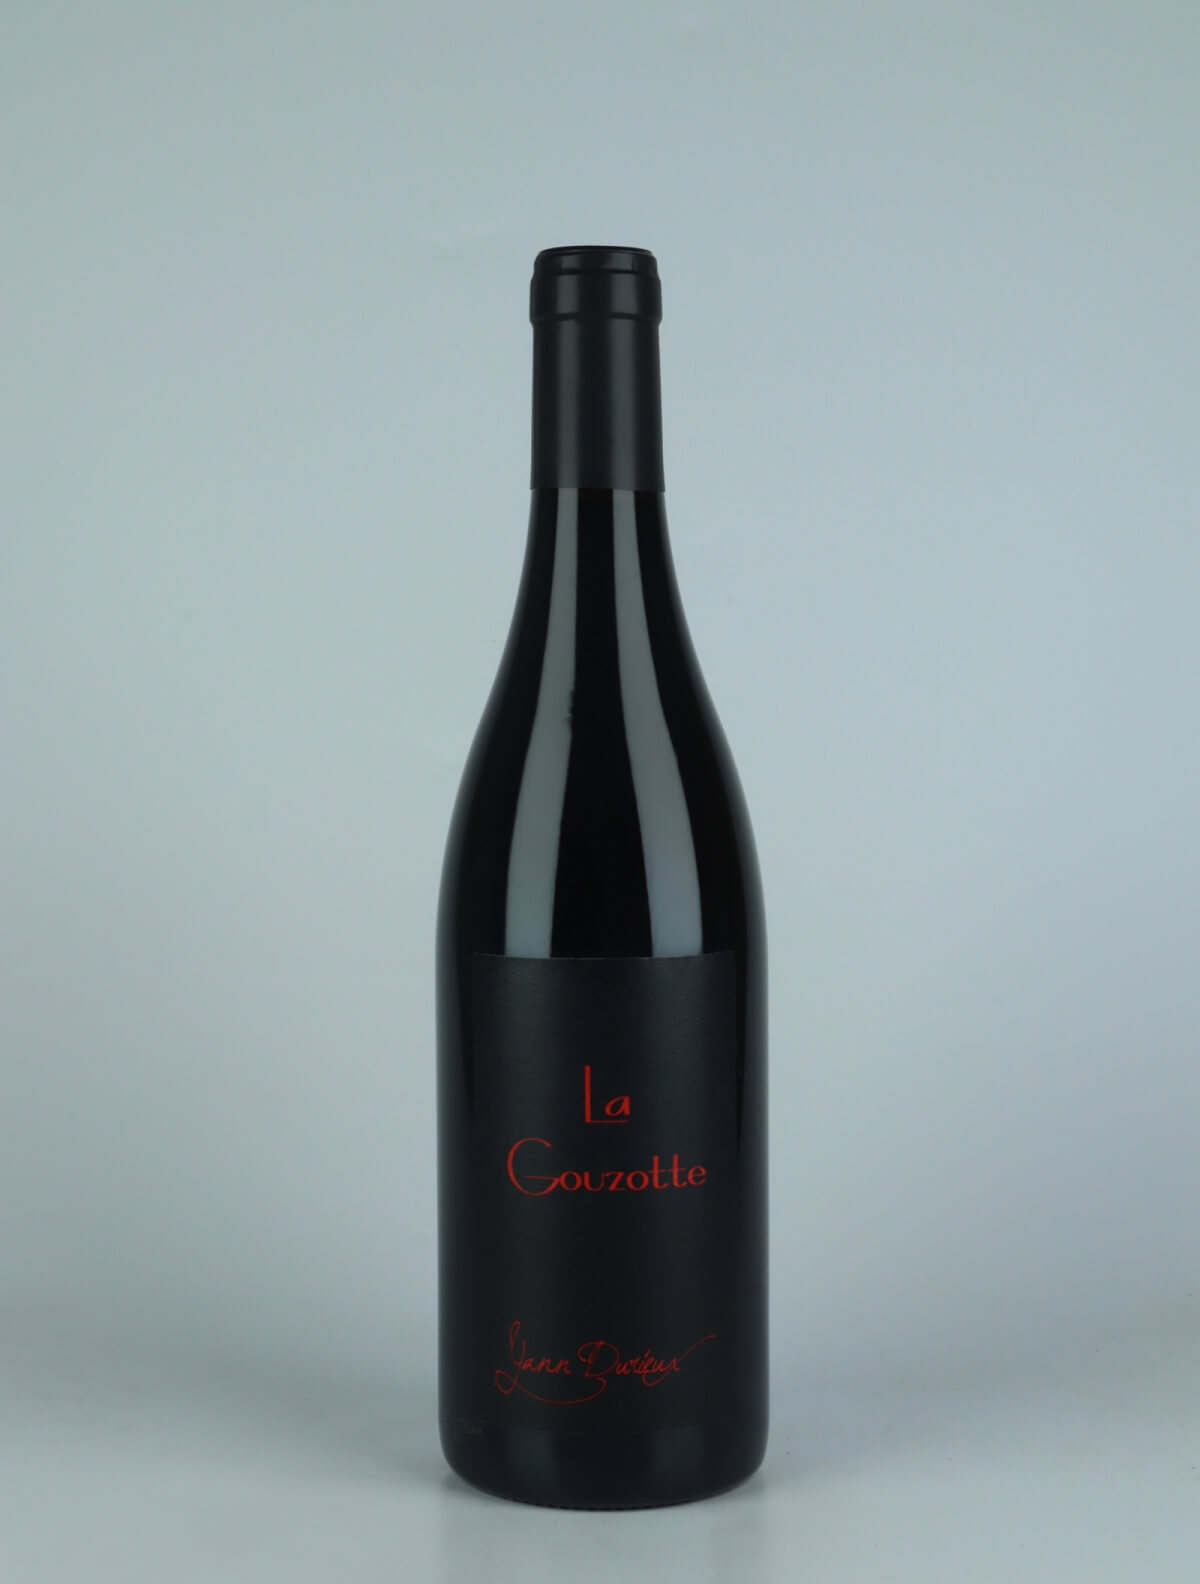 A bottle 2021 La Gouzotte Red wine from Yann Durieux, Burgundy in France